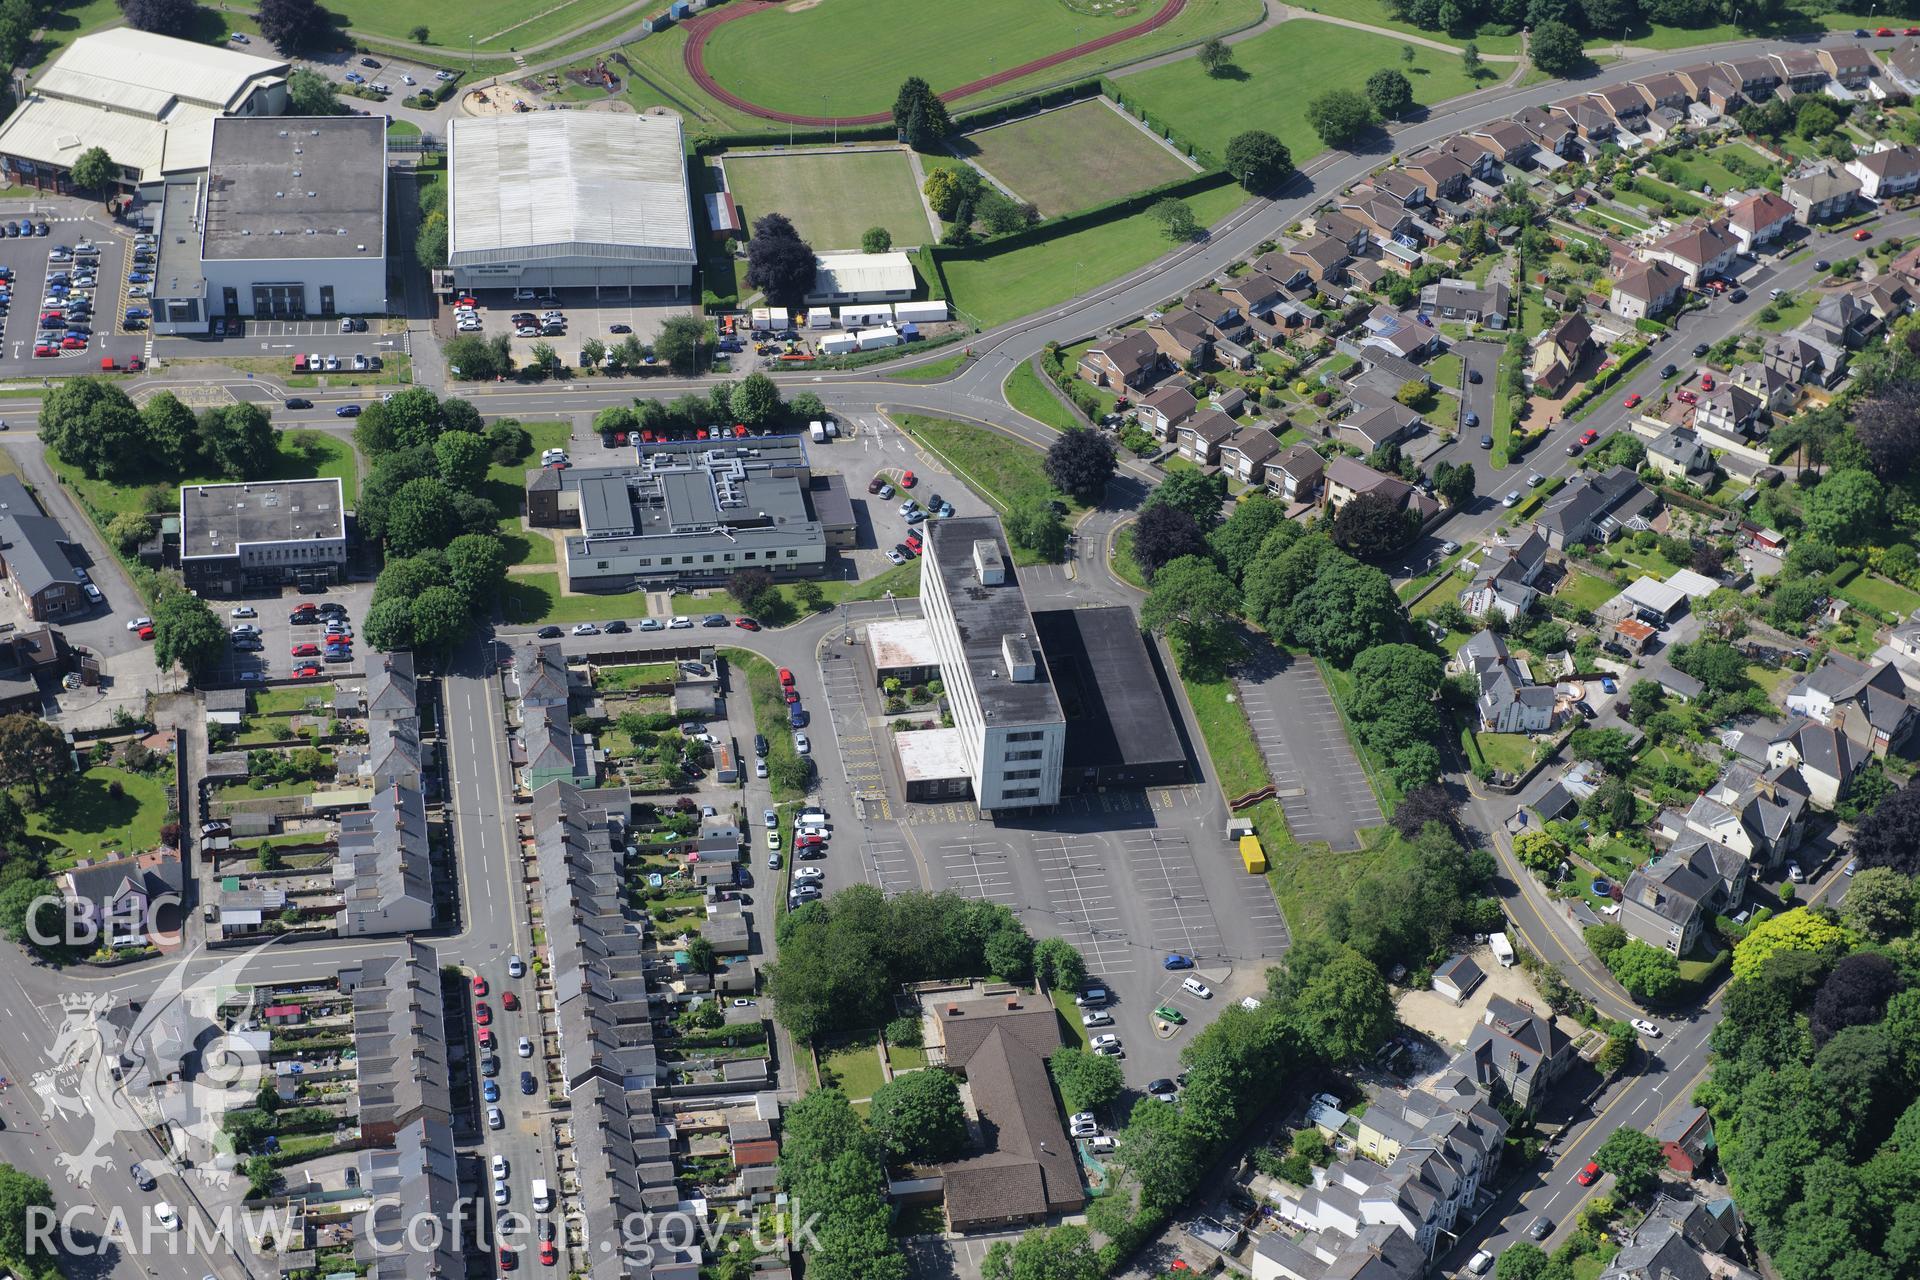 Newbridge playing fields; Bridgend Magistrates Court and other county offices, Bridgend. Oblique aerial photograph taken during the Royal Commission's programme of archaeological aerial reconnaissance by Toby Driver on 19th June 2015.